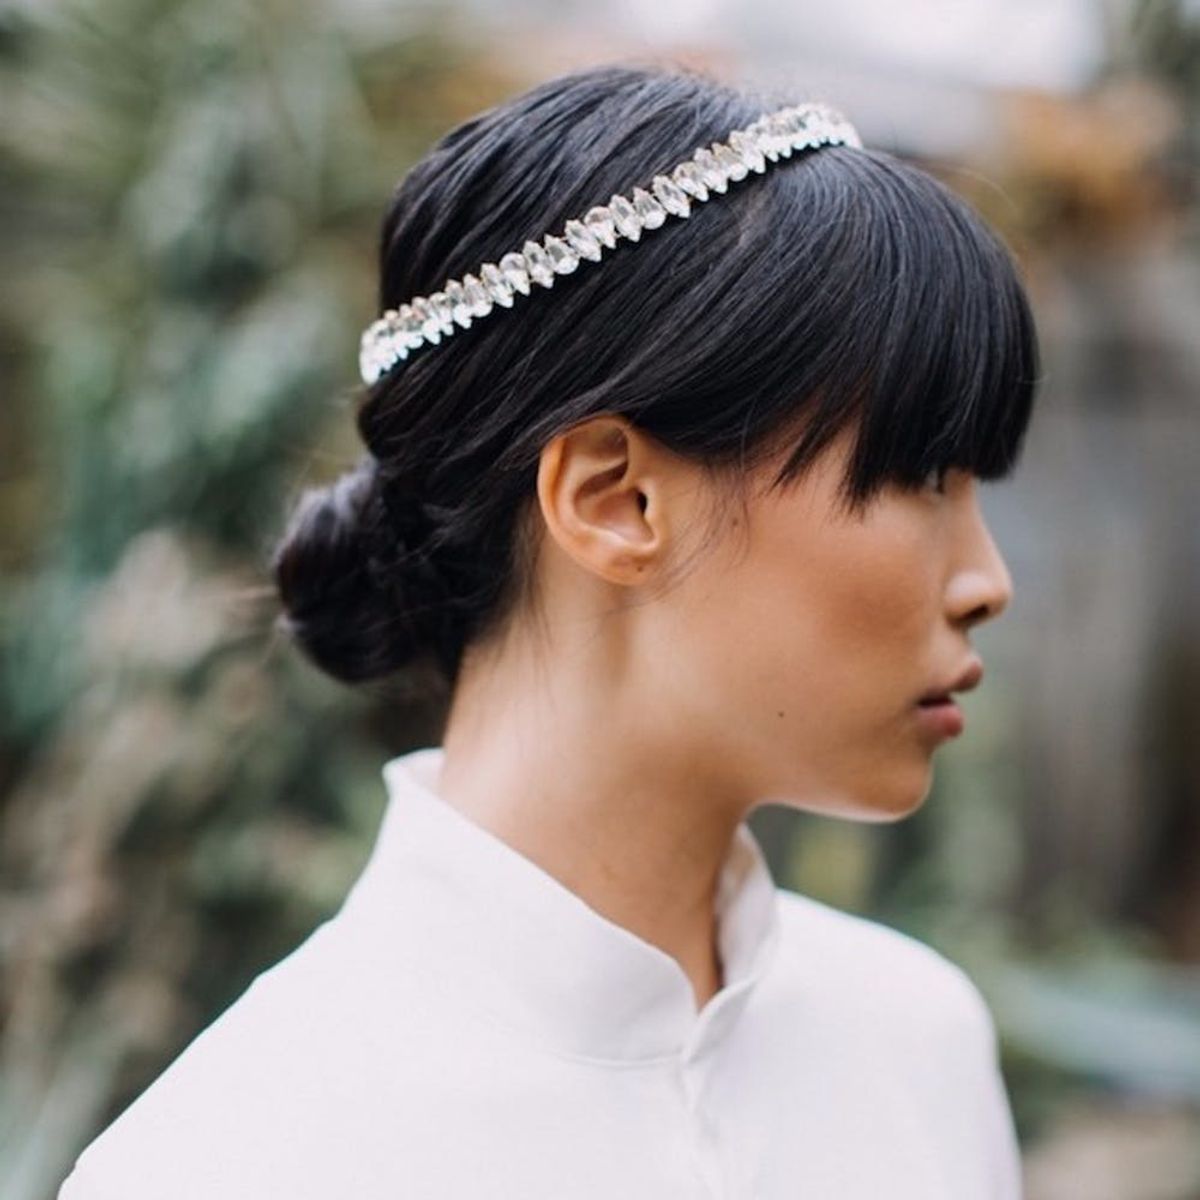 16 Bridal Hair Accessories for Truly Unforgettable Wedding Hair in 2018